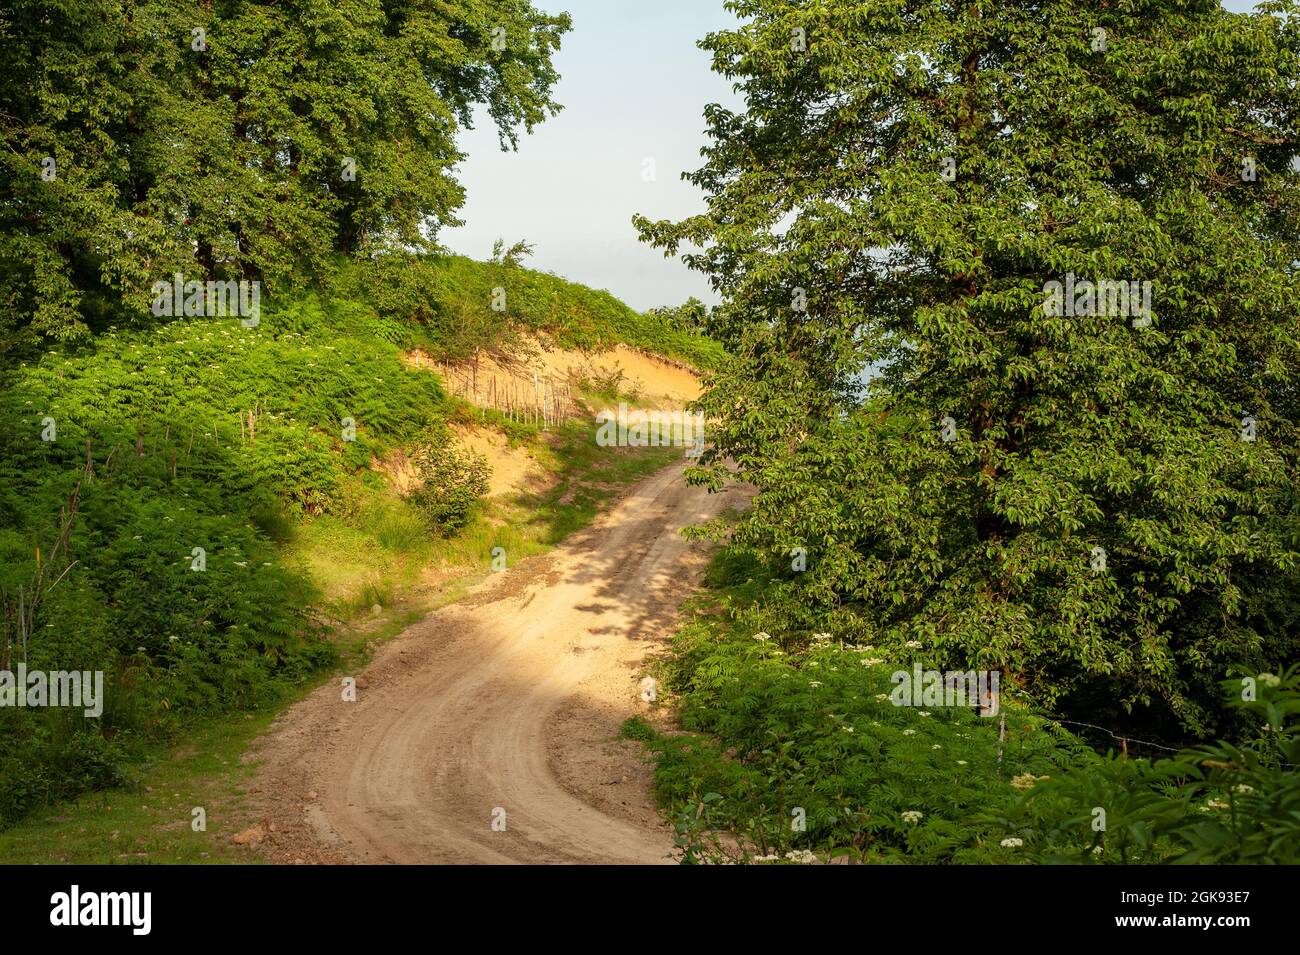 the view of countryside dirt road with alder trees in gilan province, Iran Stock Photo